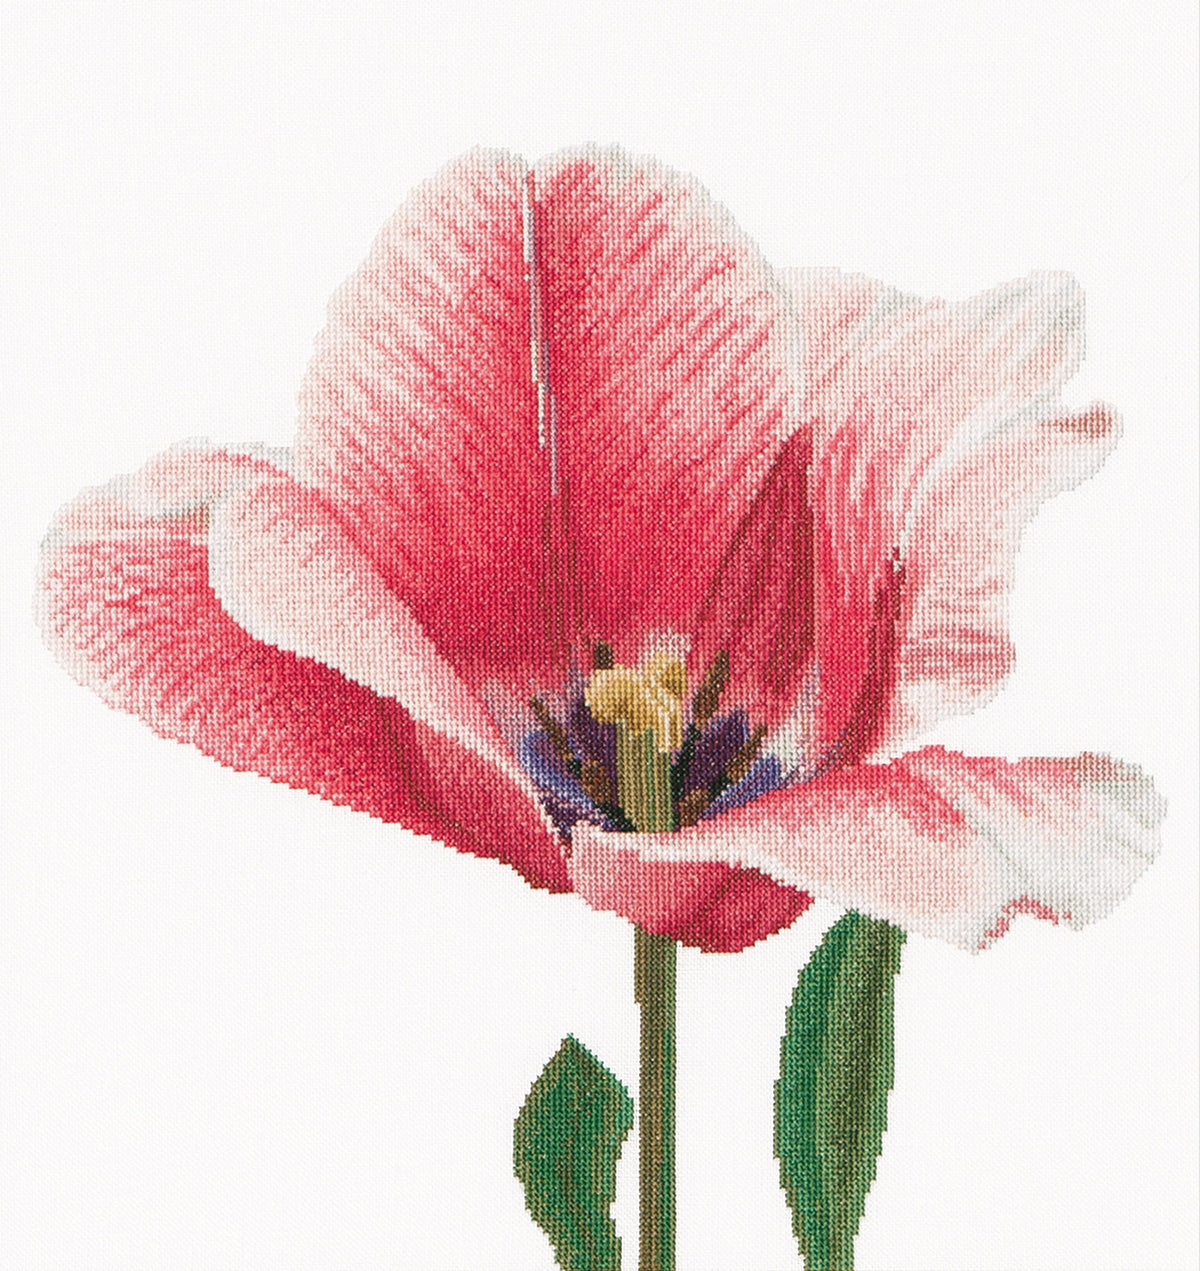 Thea Gouverneur - Counted Cross Stitch Kit - Pink Darwin Hybrid Tulip - Aida - 16 count - 518A - Thea Gouverneur Since 1959